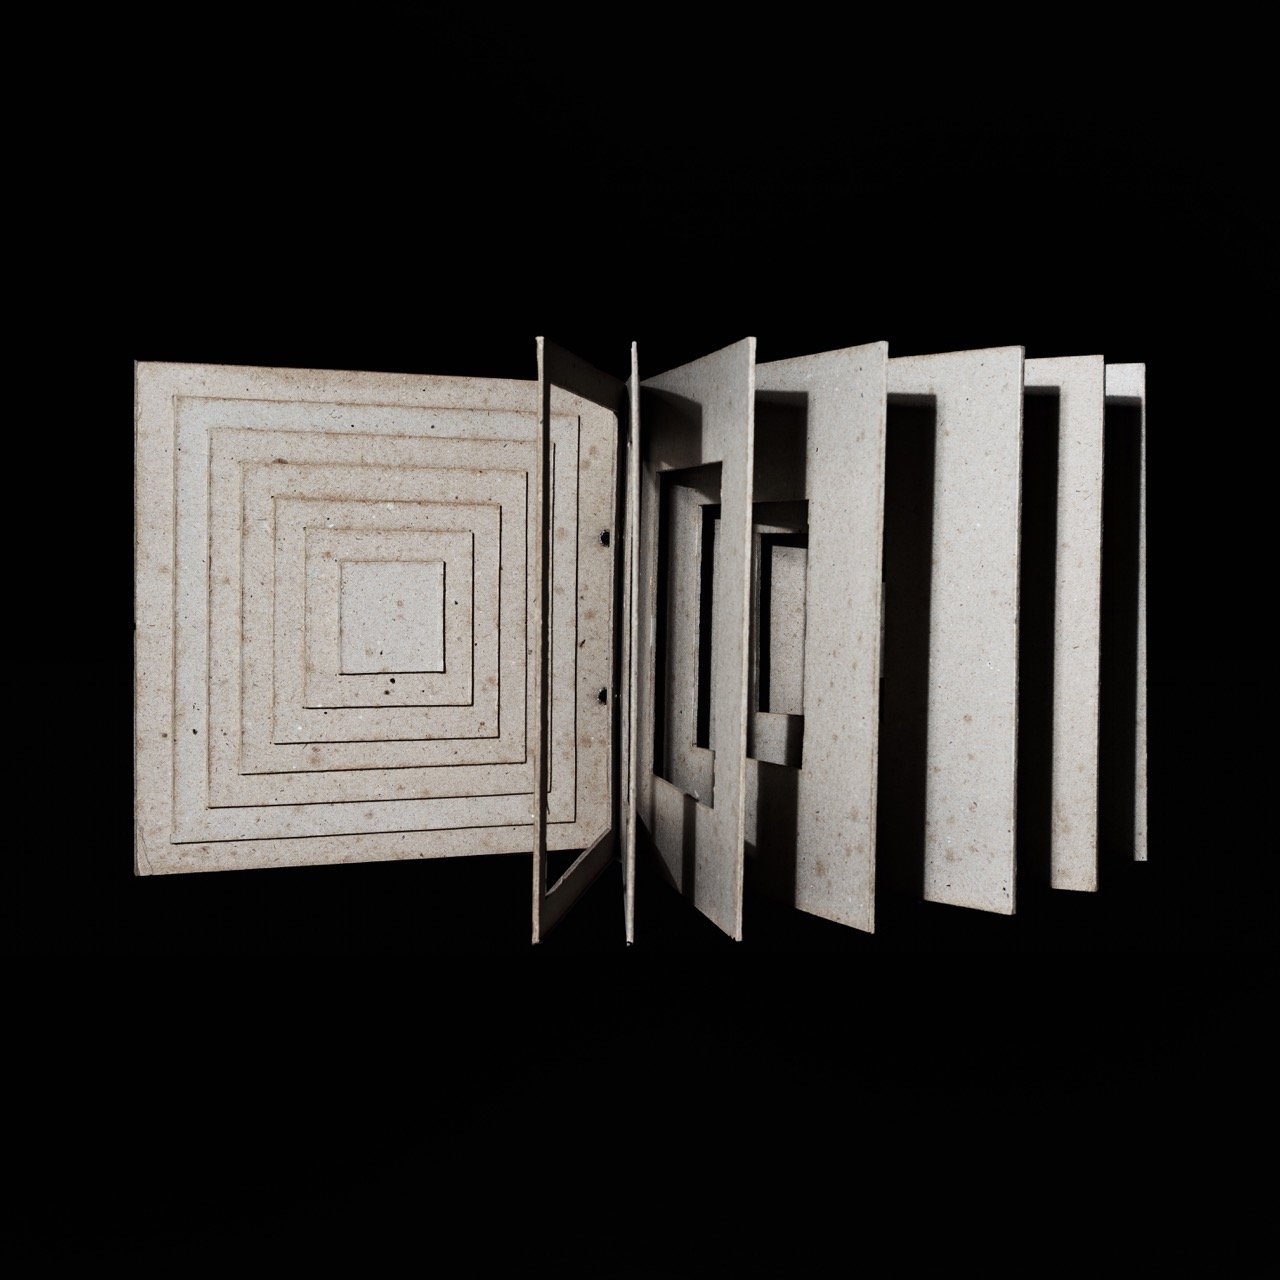 Square's square, 1979
Object-book in cardboard, cloth and metal rings